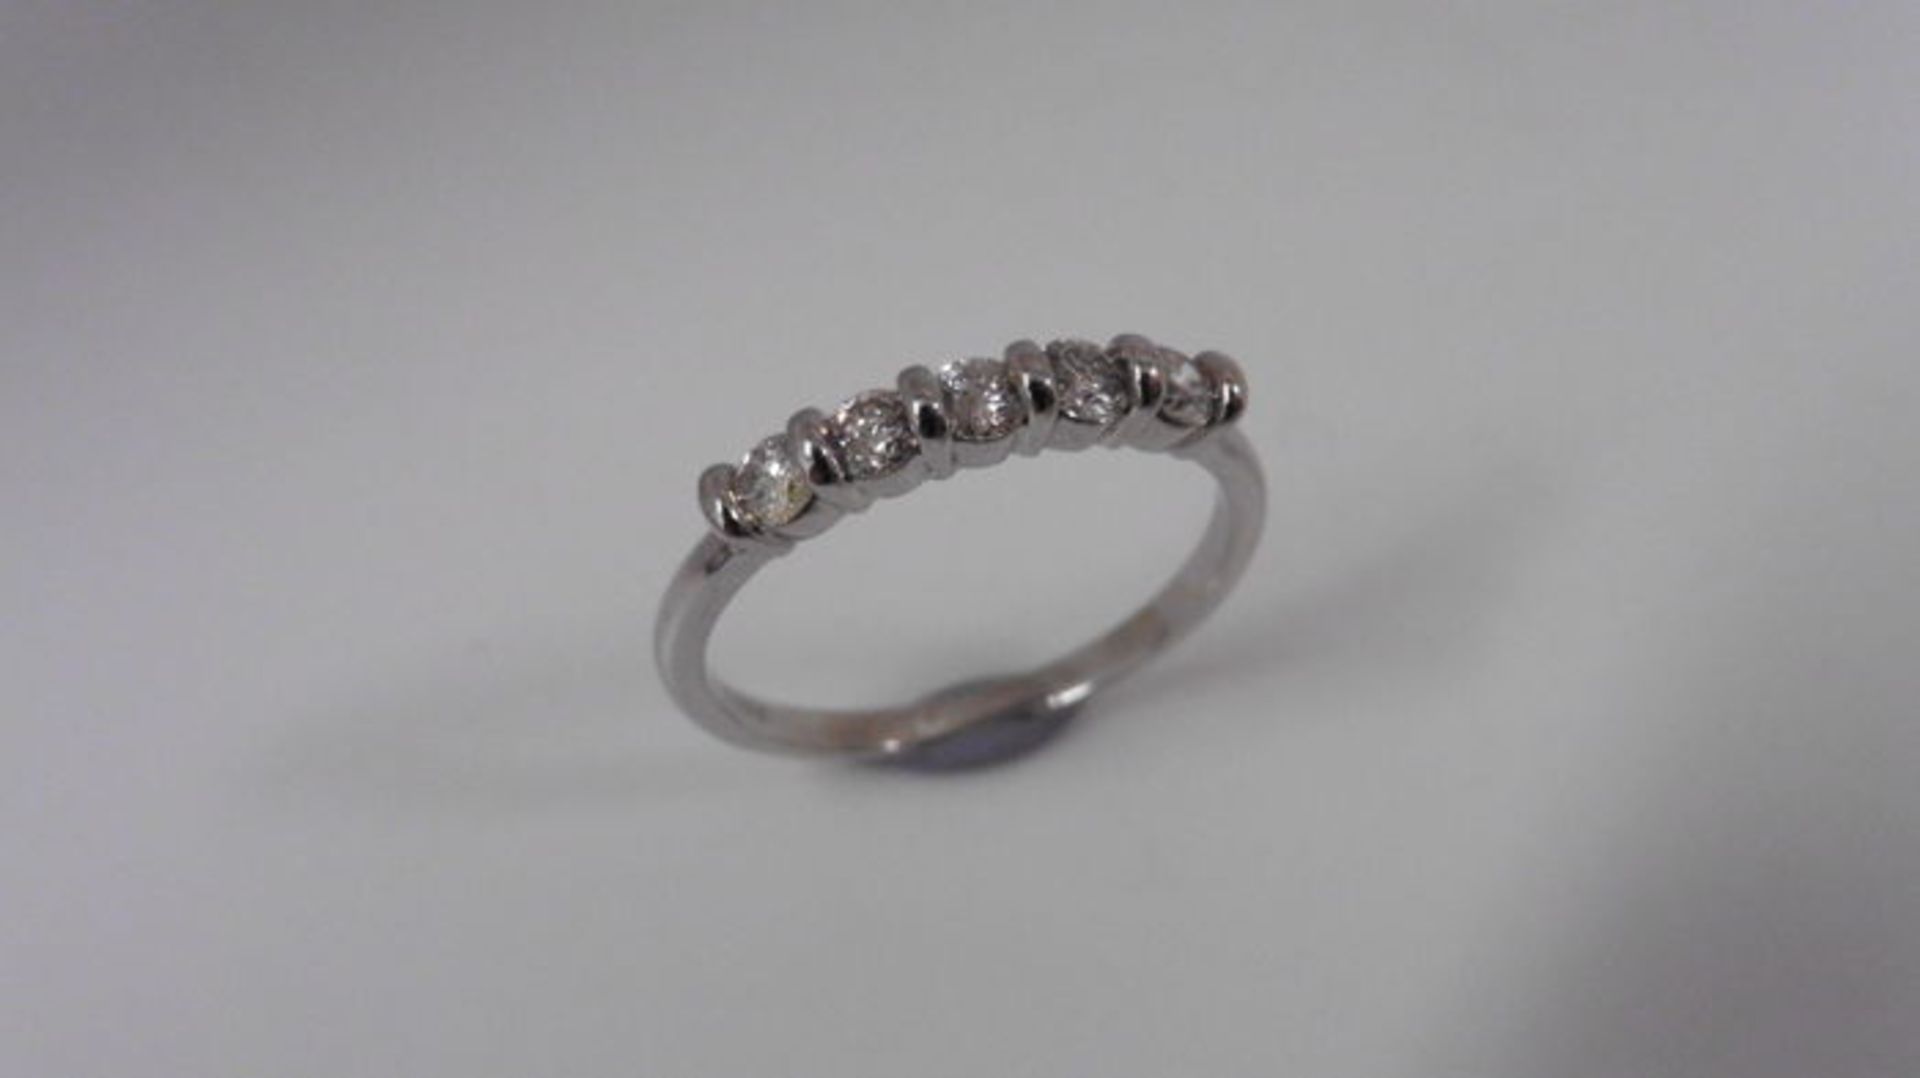 0.50ct diamond five stone ring set platinum. I colour and si3 clarity. Bar setting with brilliant